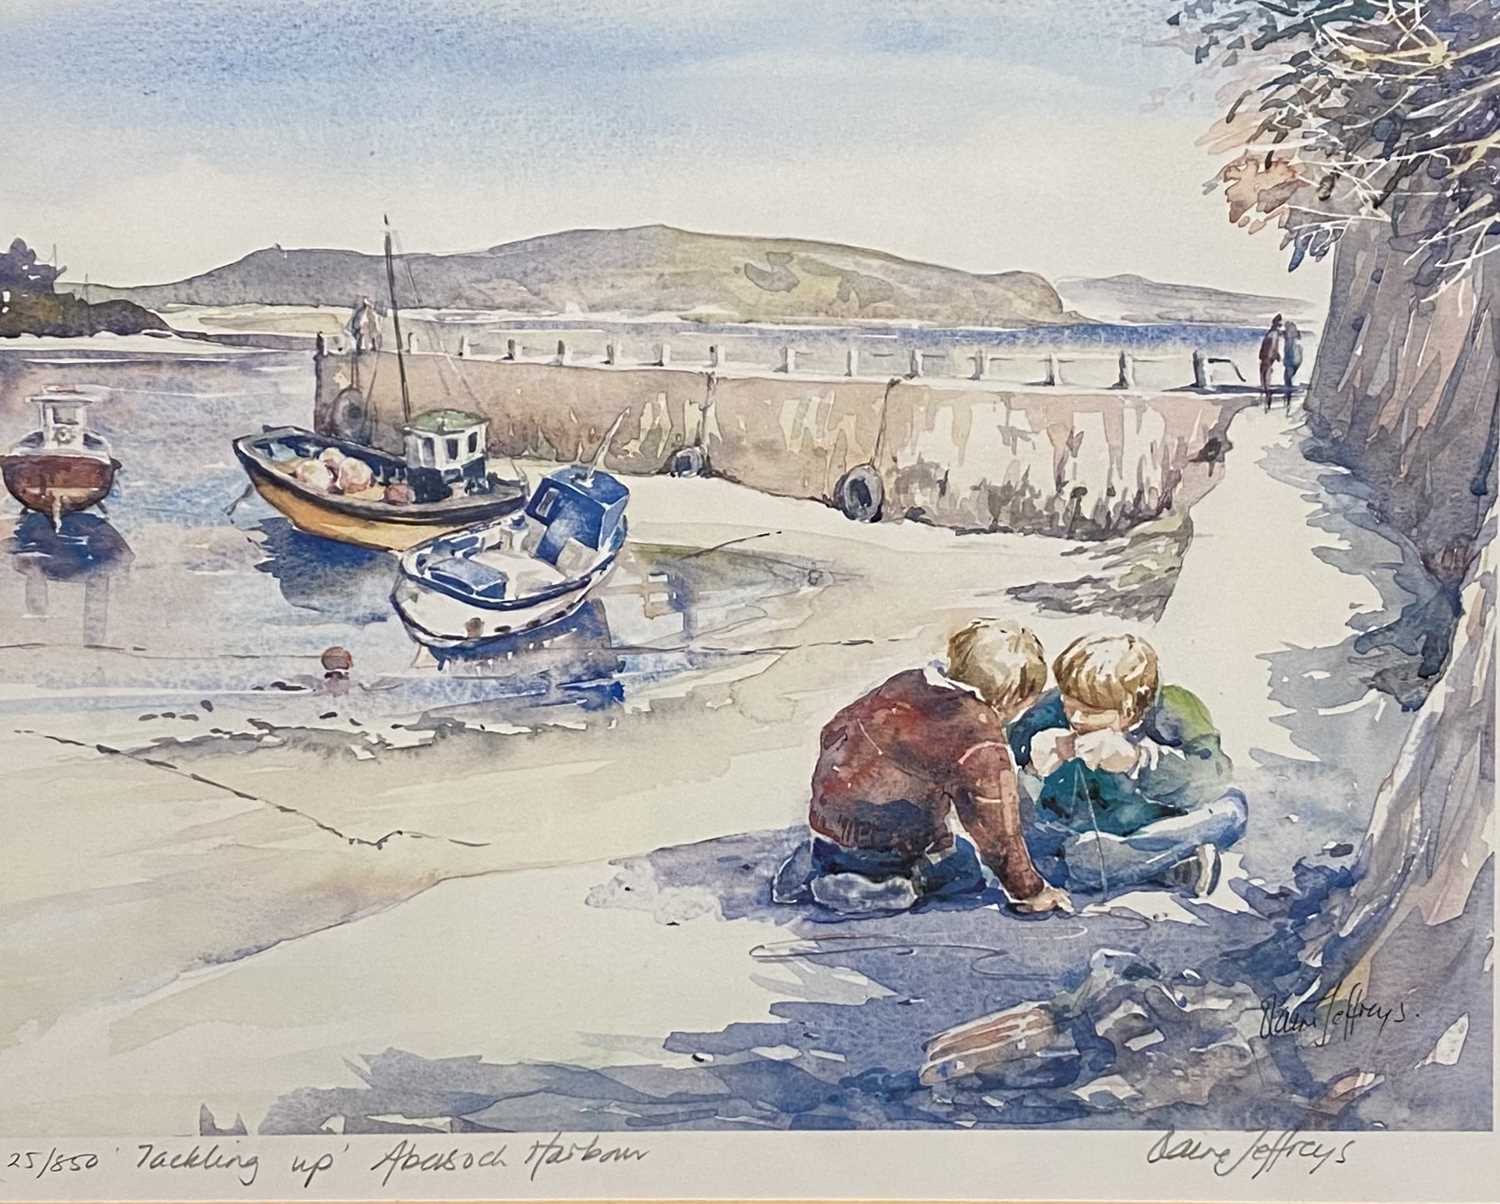 ELAINE JEFFREYS limited edition colour print (25/850) - 'Tackling Up Abersoch Harbour', signed, - Image 2 of 3